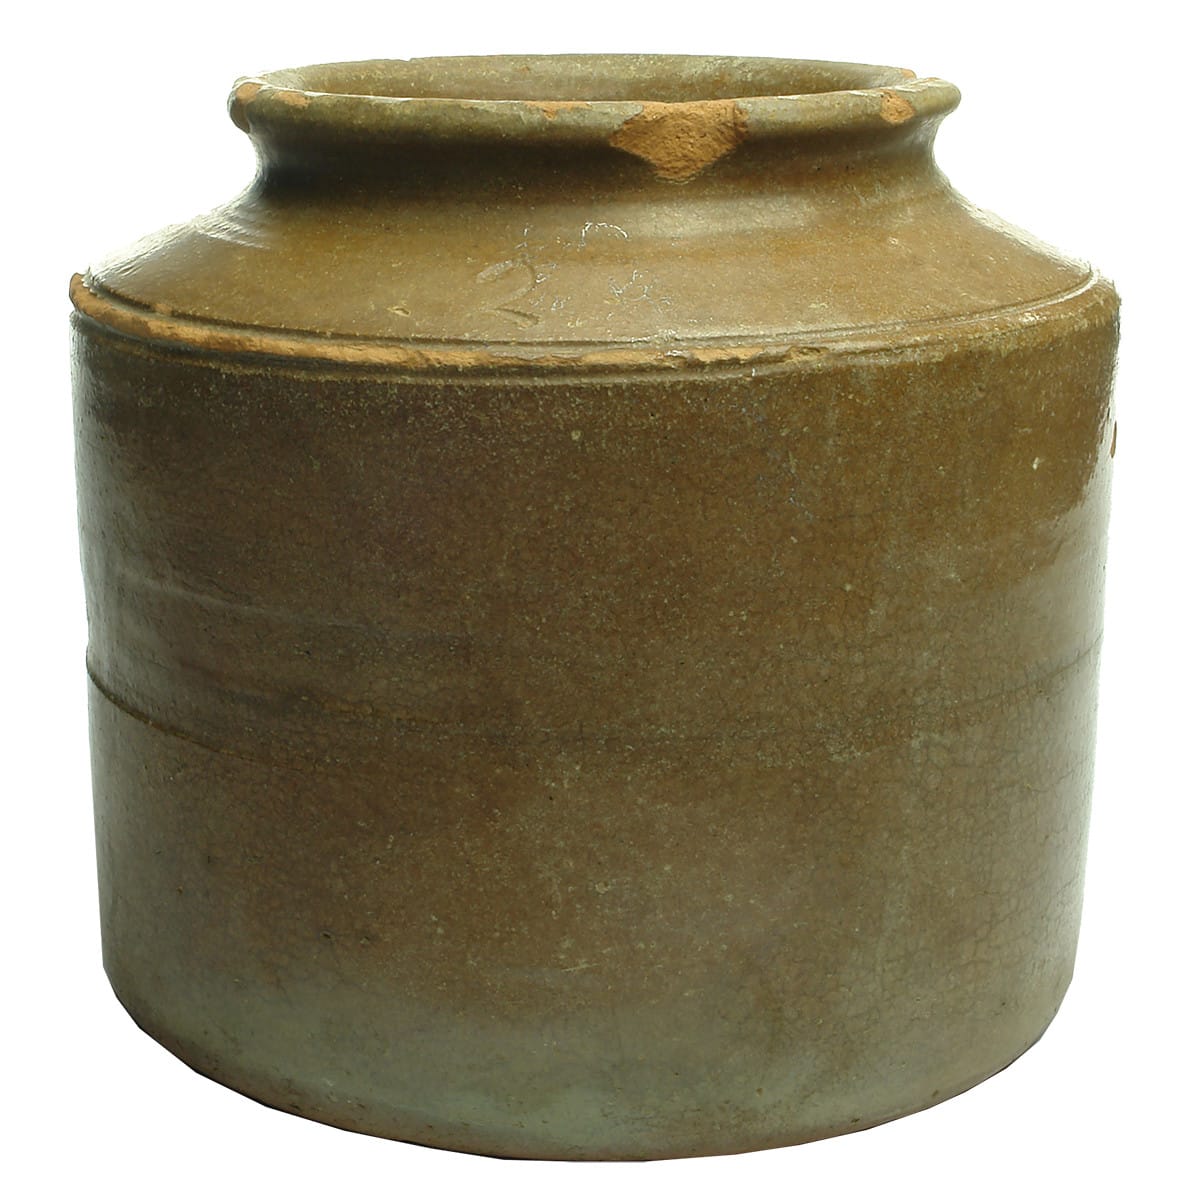 Very crude stoneware red jar with brown glaze. Hand drawn 2 in shoulder. Some early Australian pottery.